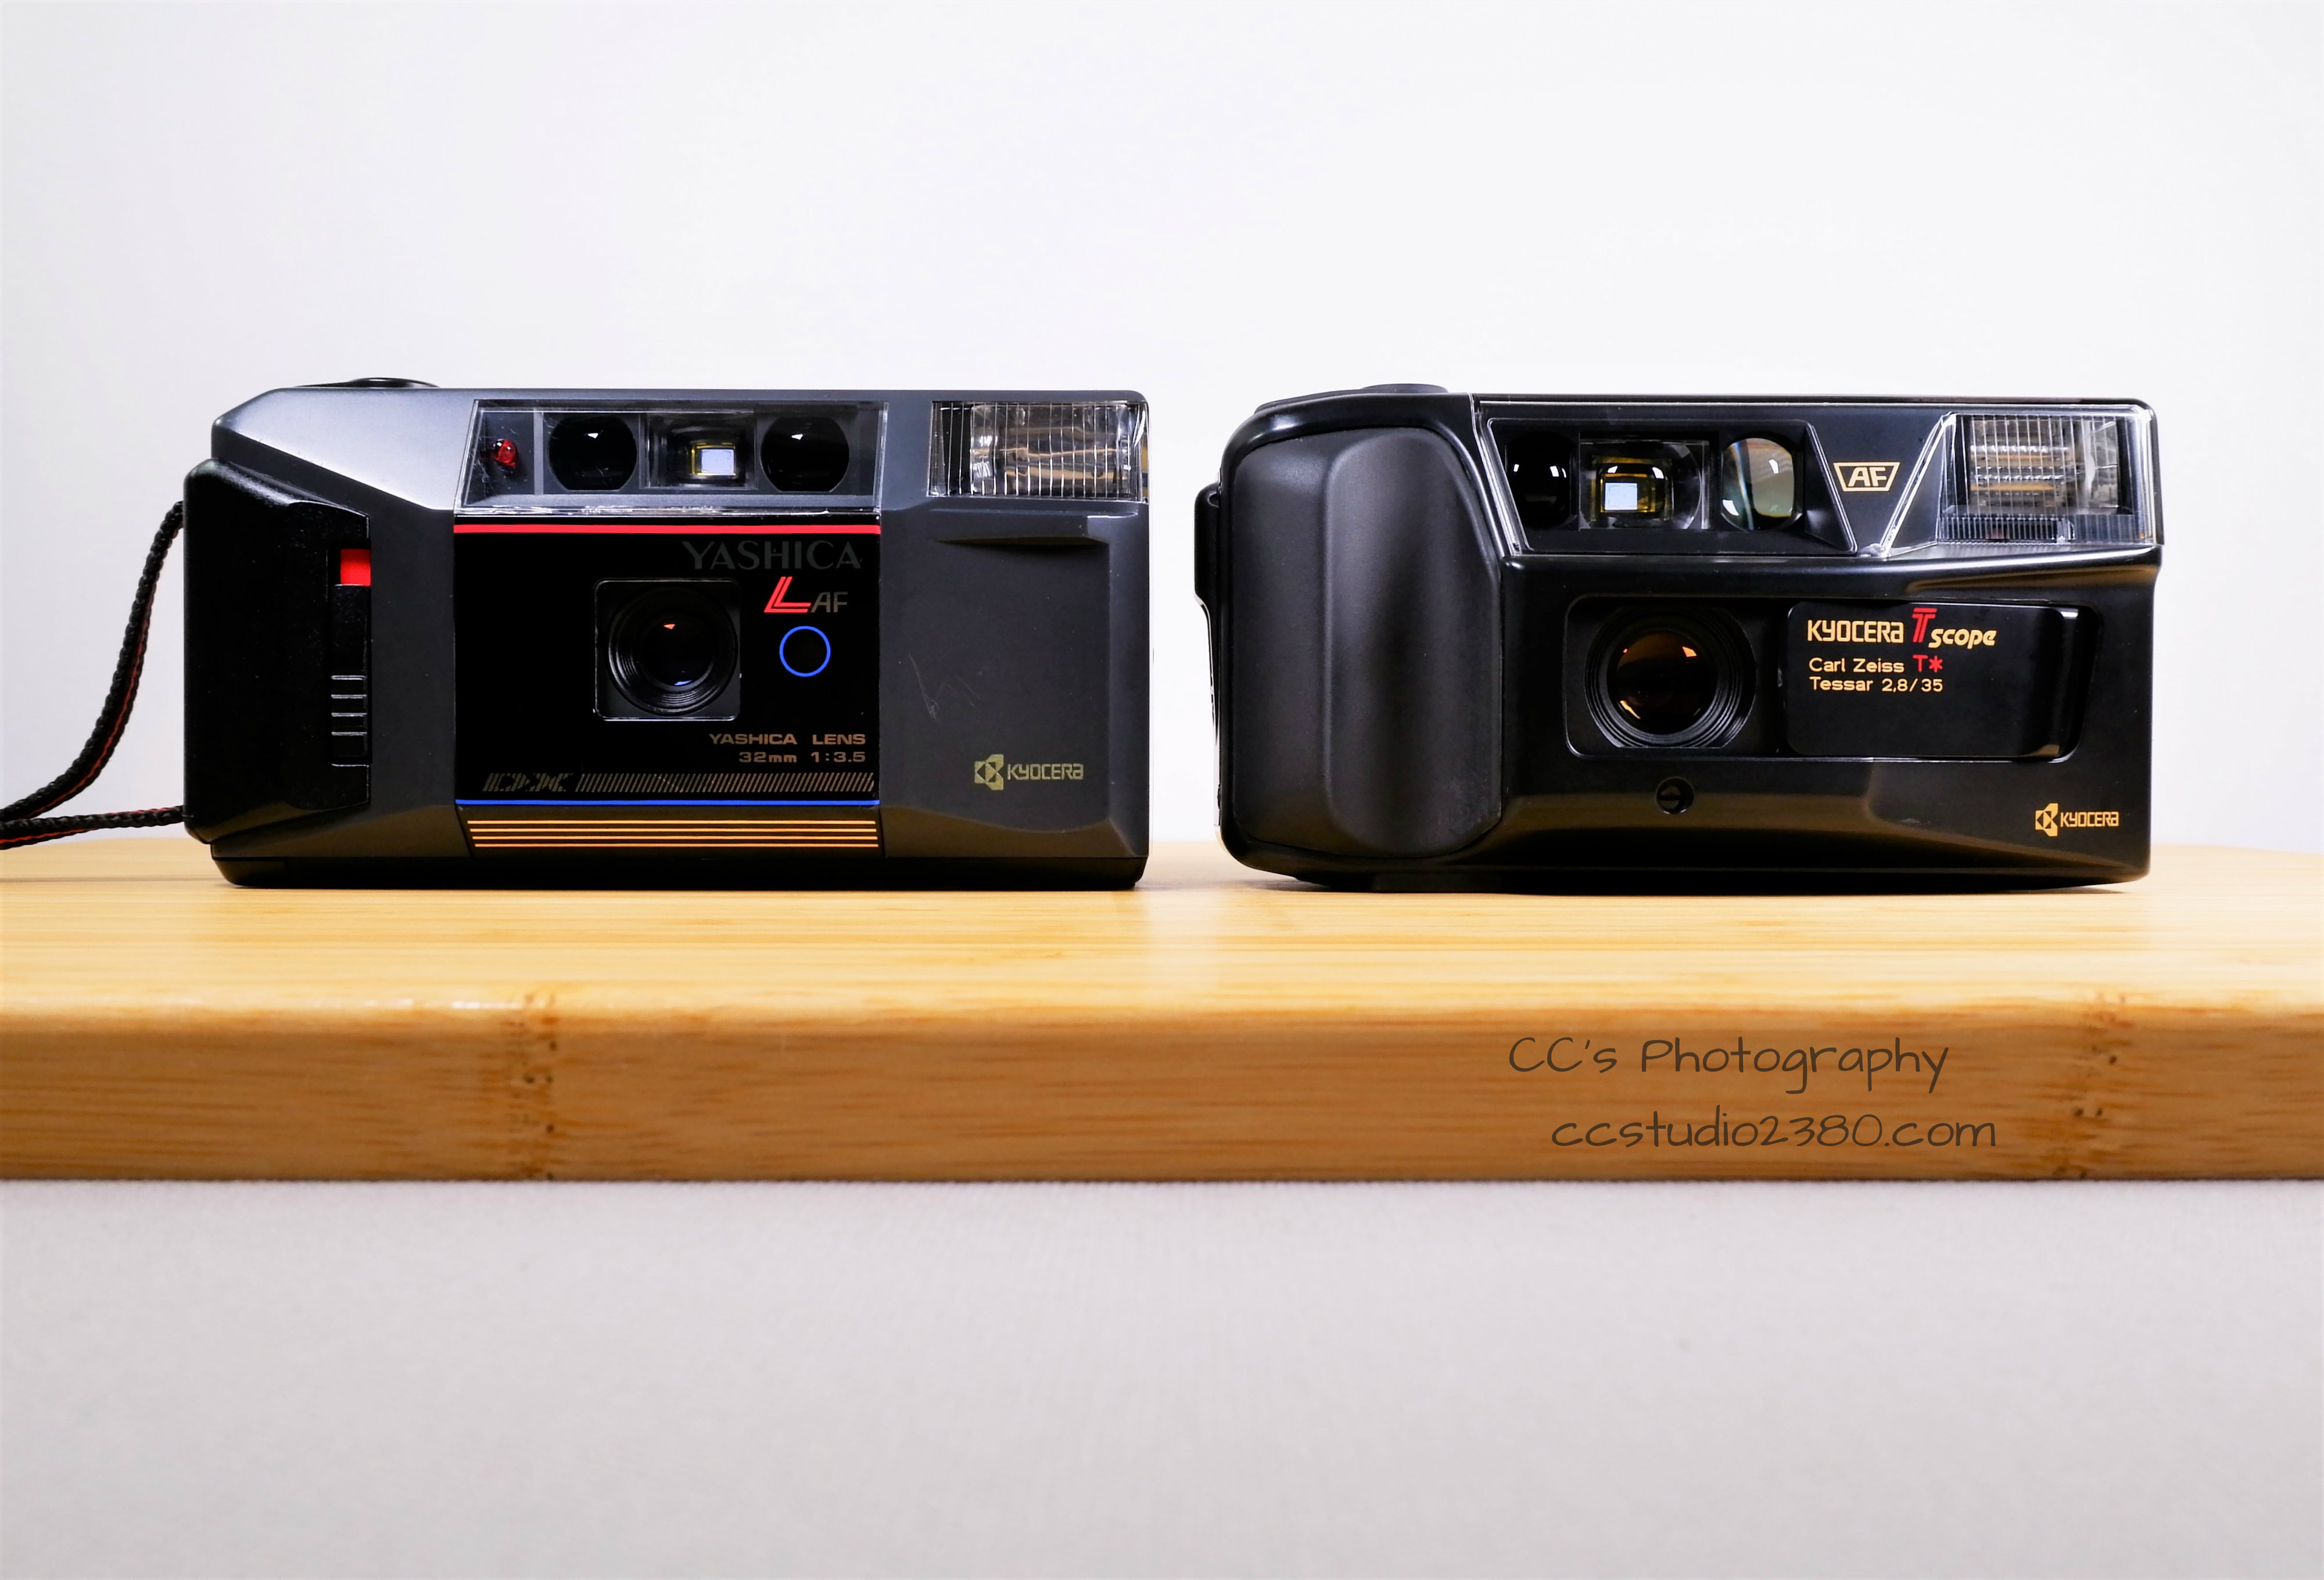 Yashica L AF vs. Kyocera T Scope | Chasing Classic Cameras with Chris